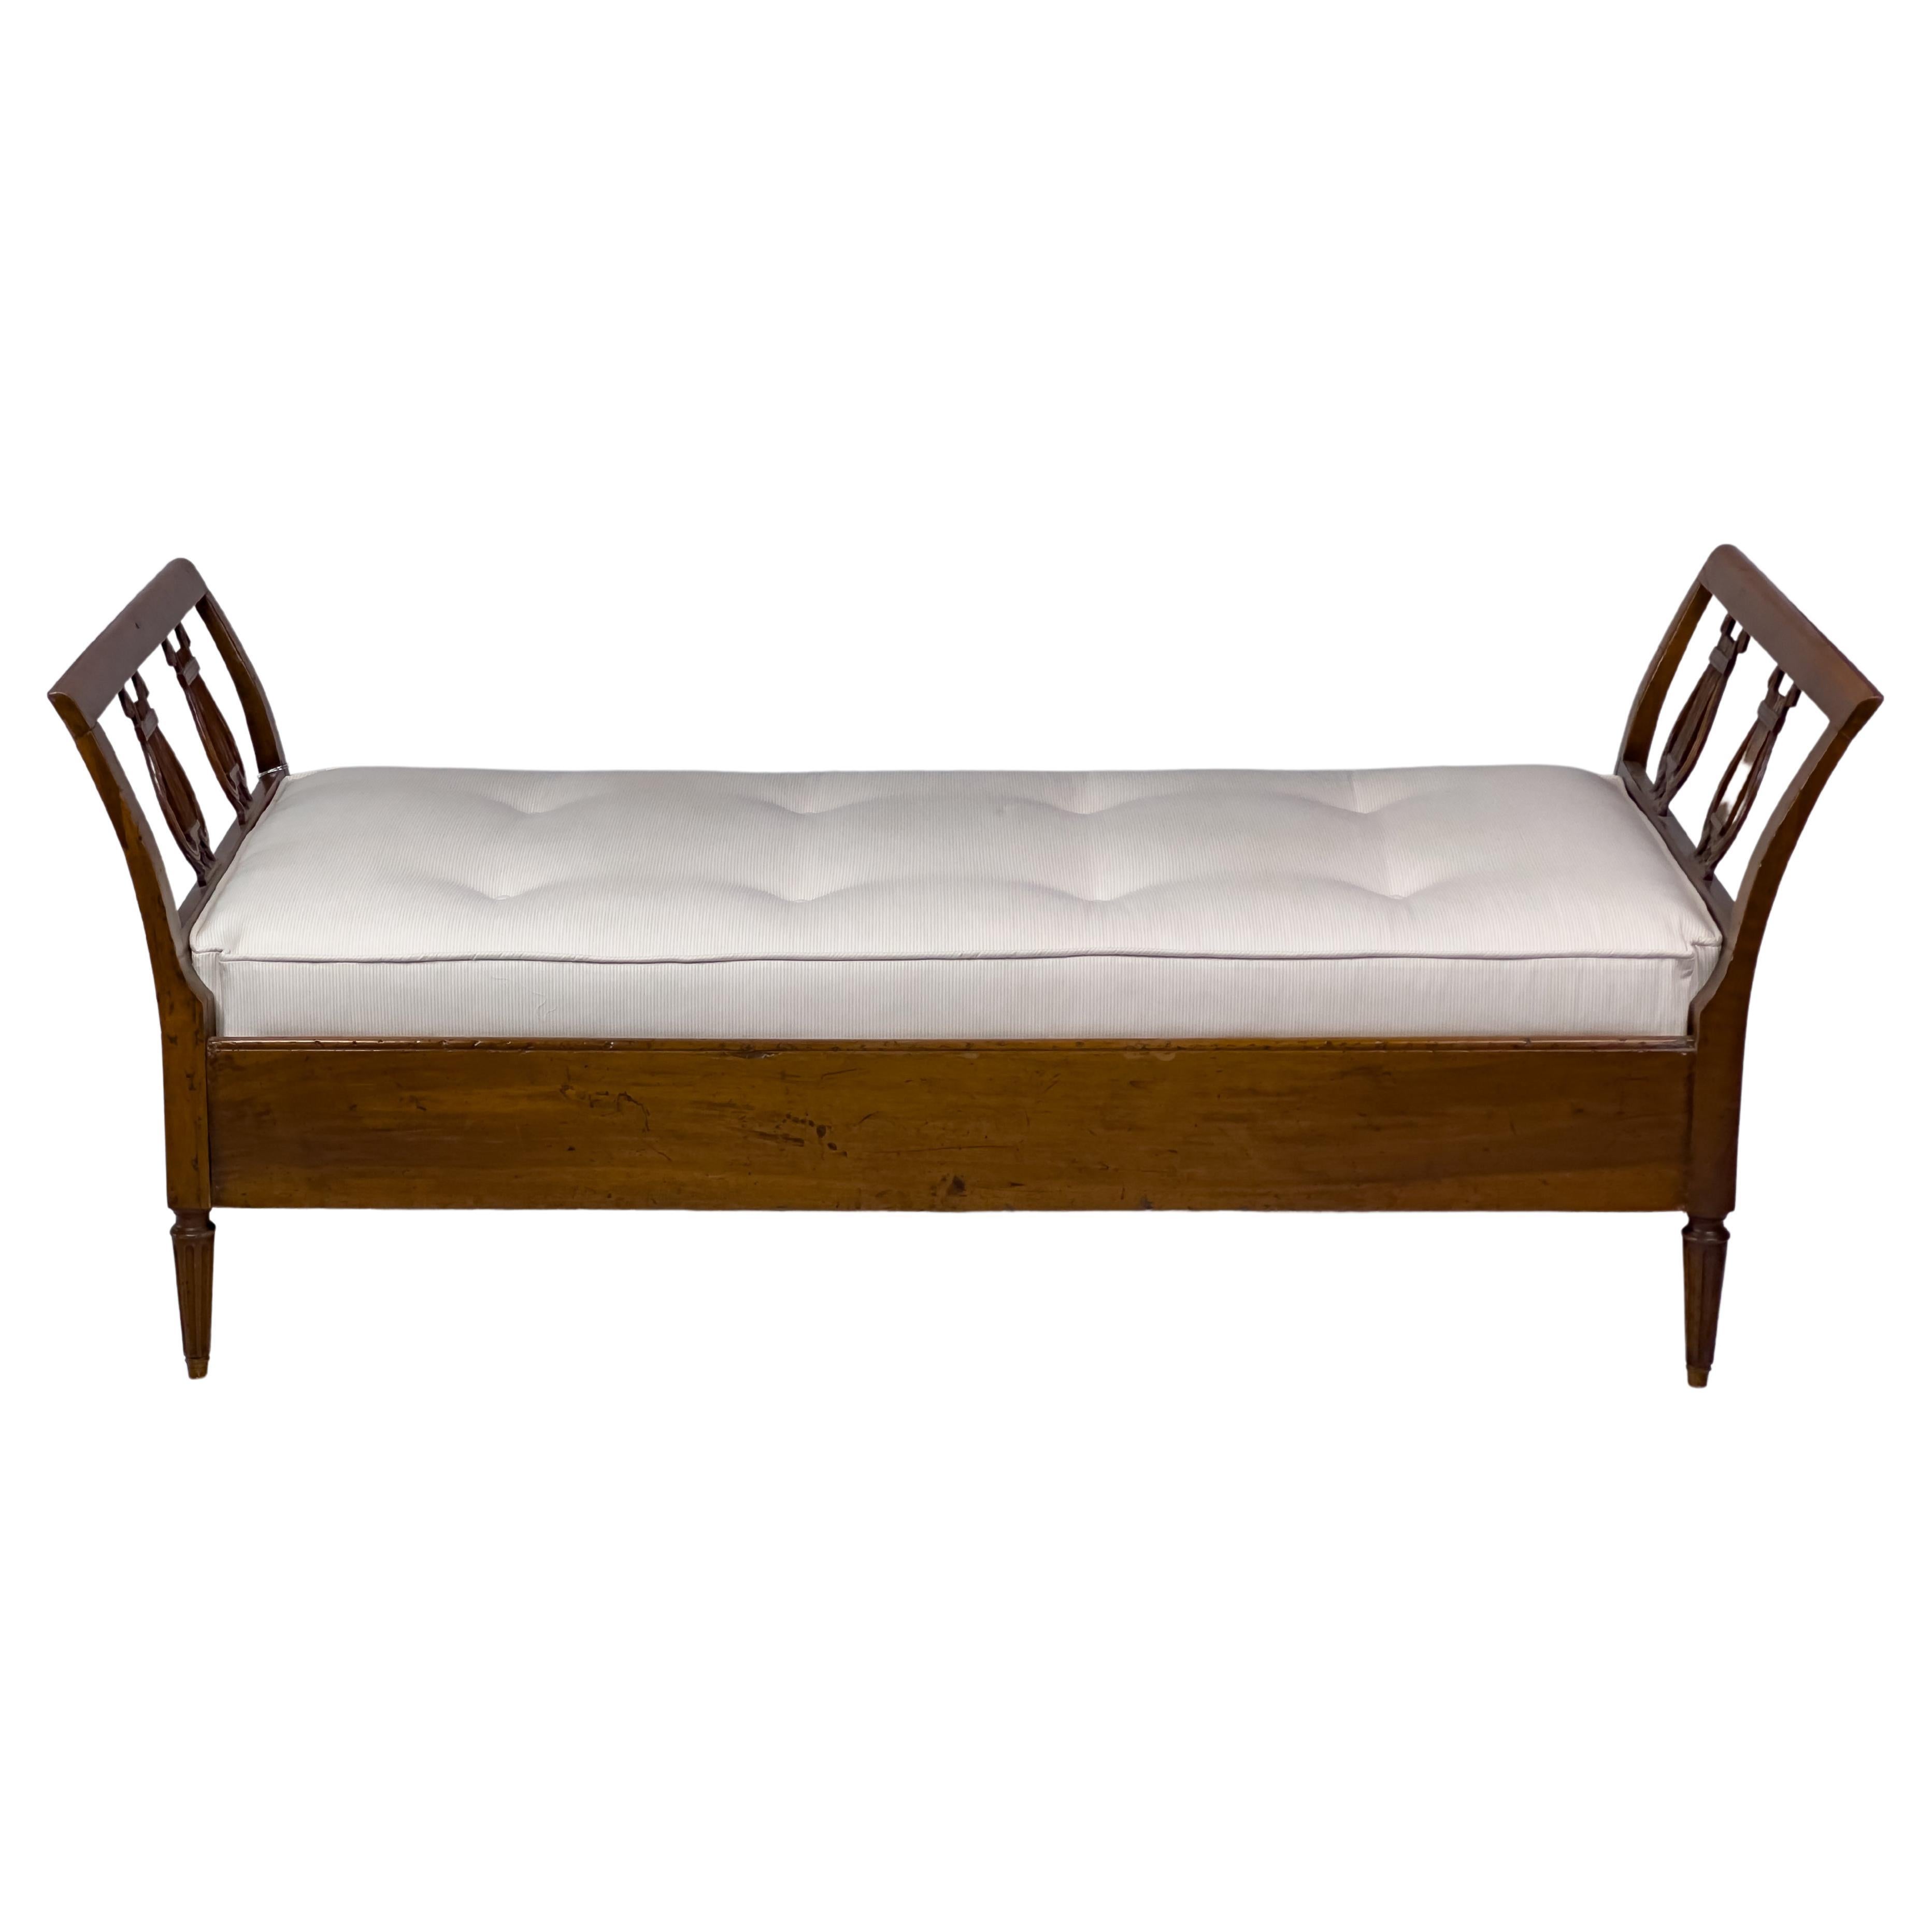 19th c. French Daybed For Sale